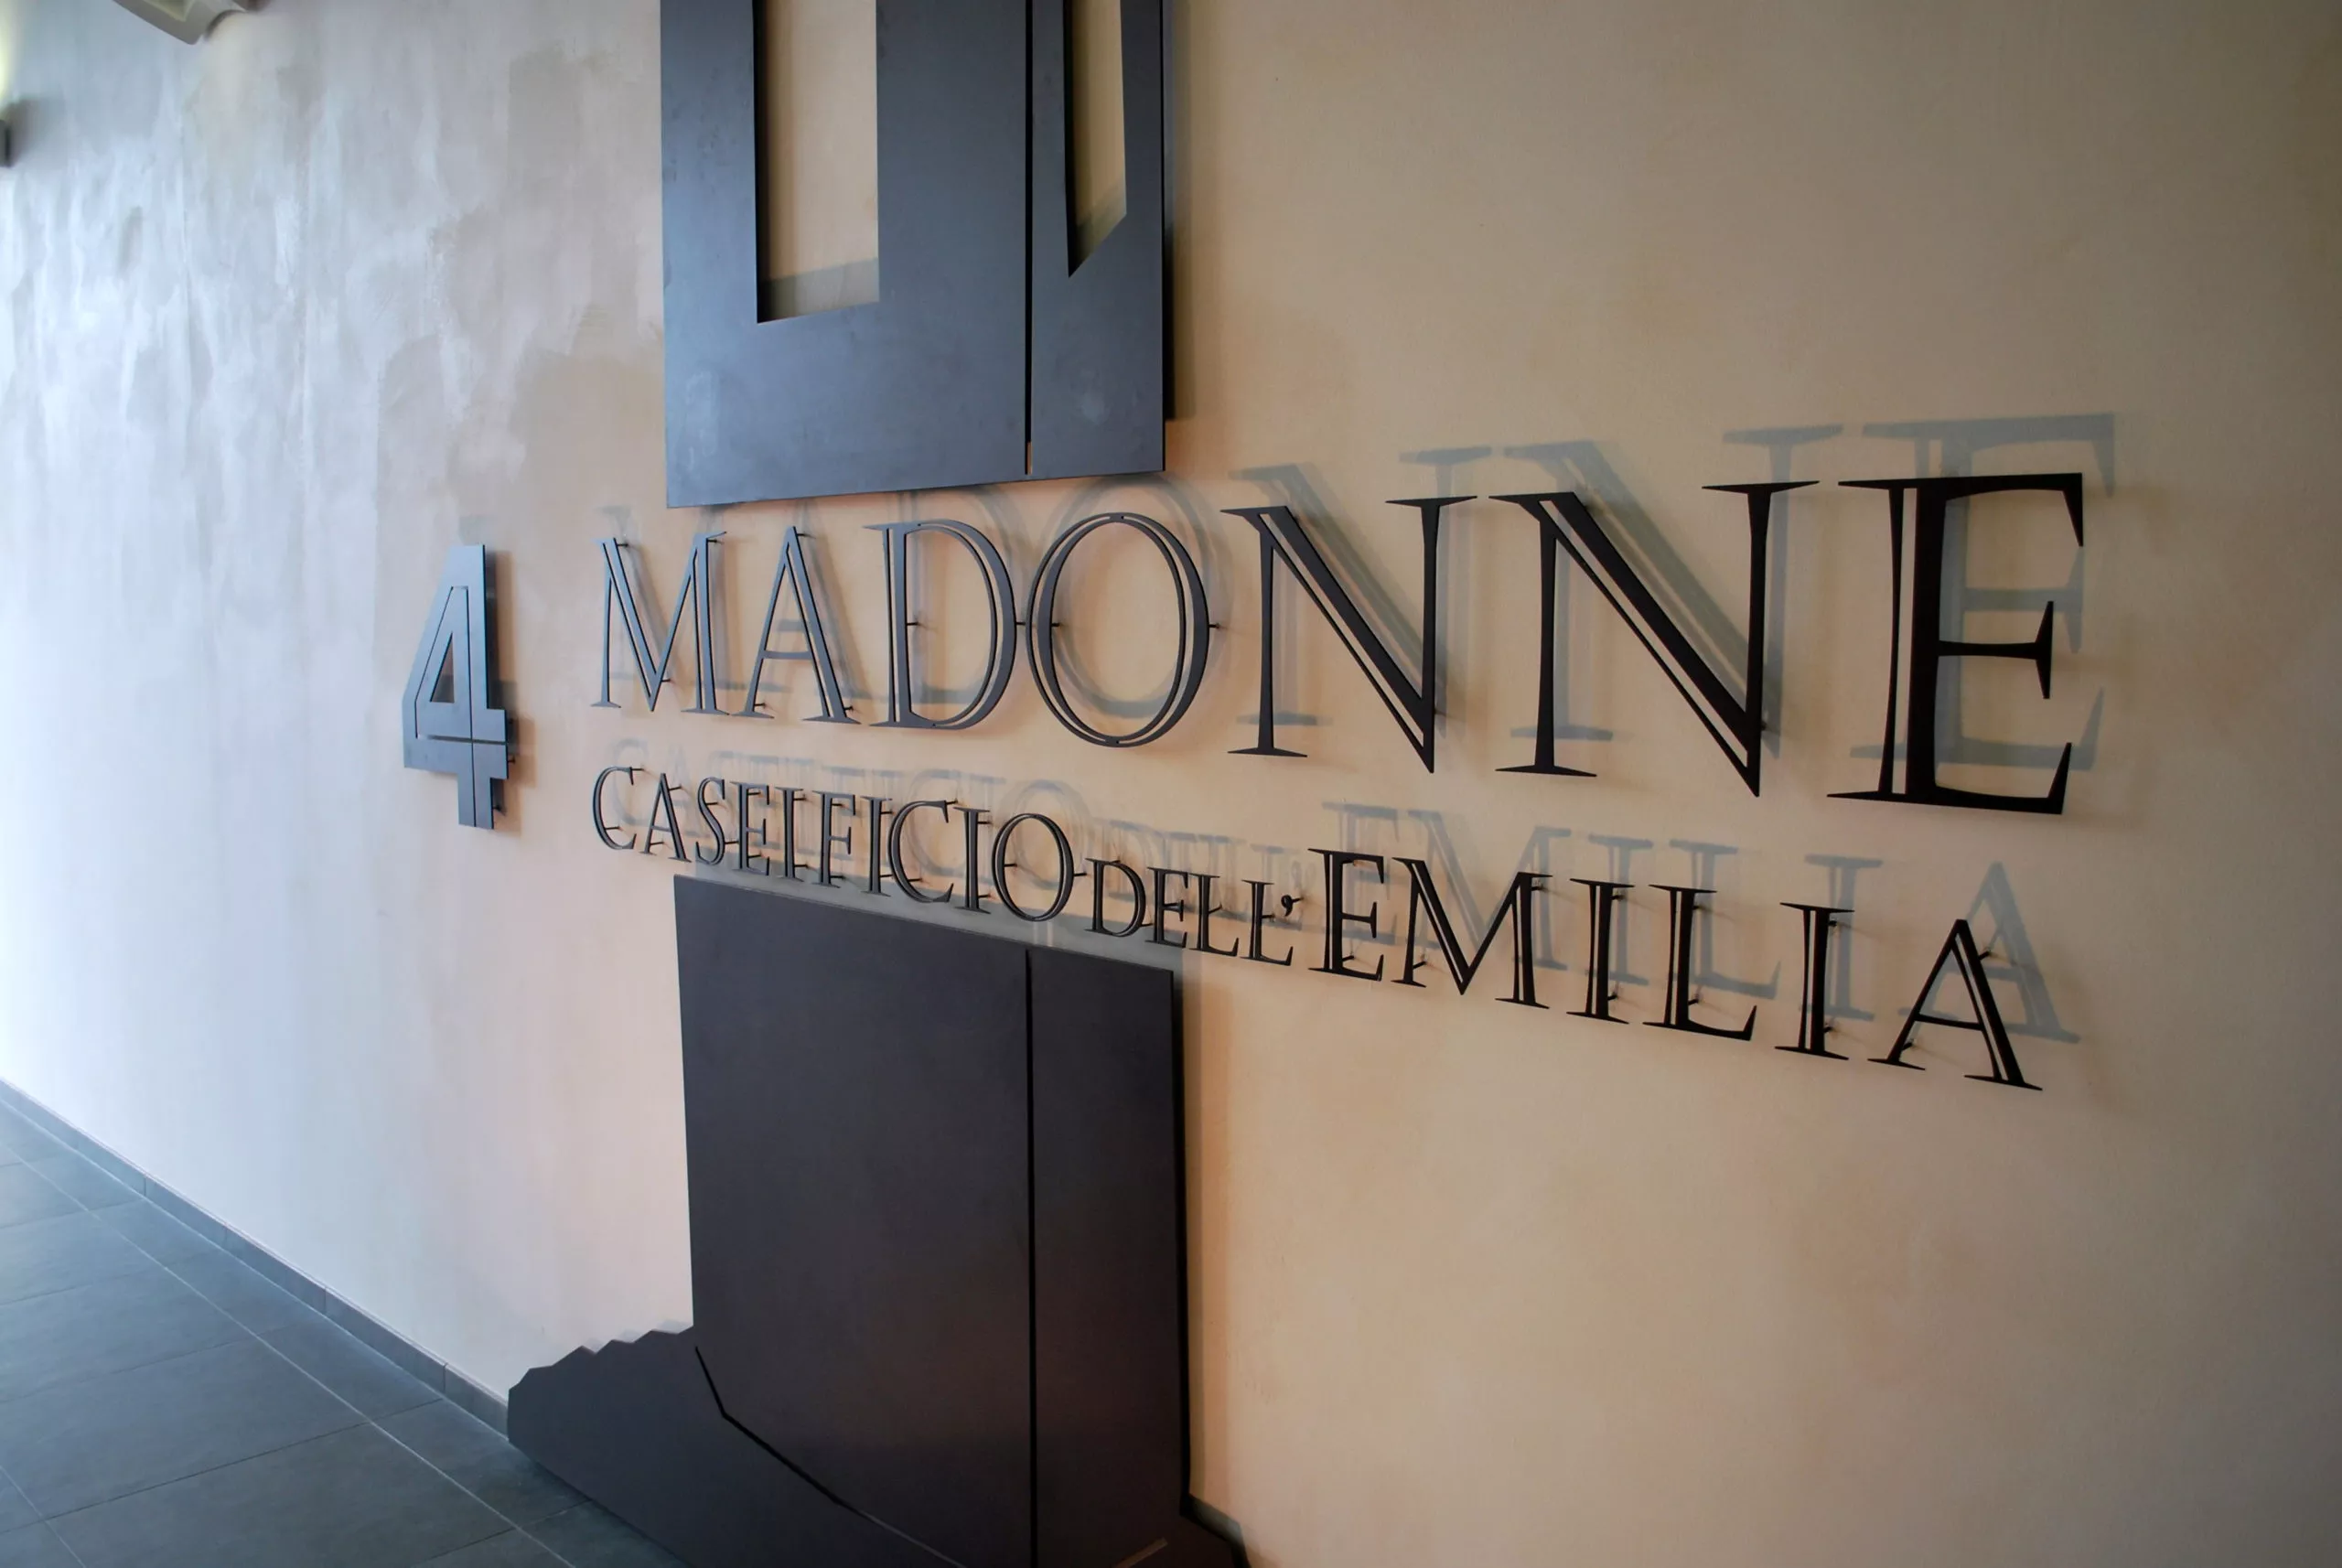 4 Madonnas Dairy of Emilia in Italy, Europe | Cheesemakers - Rated 4.4